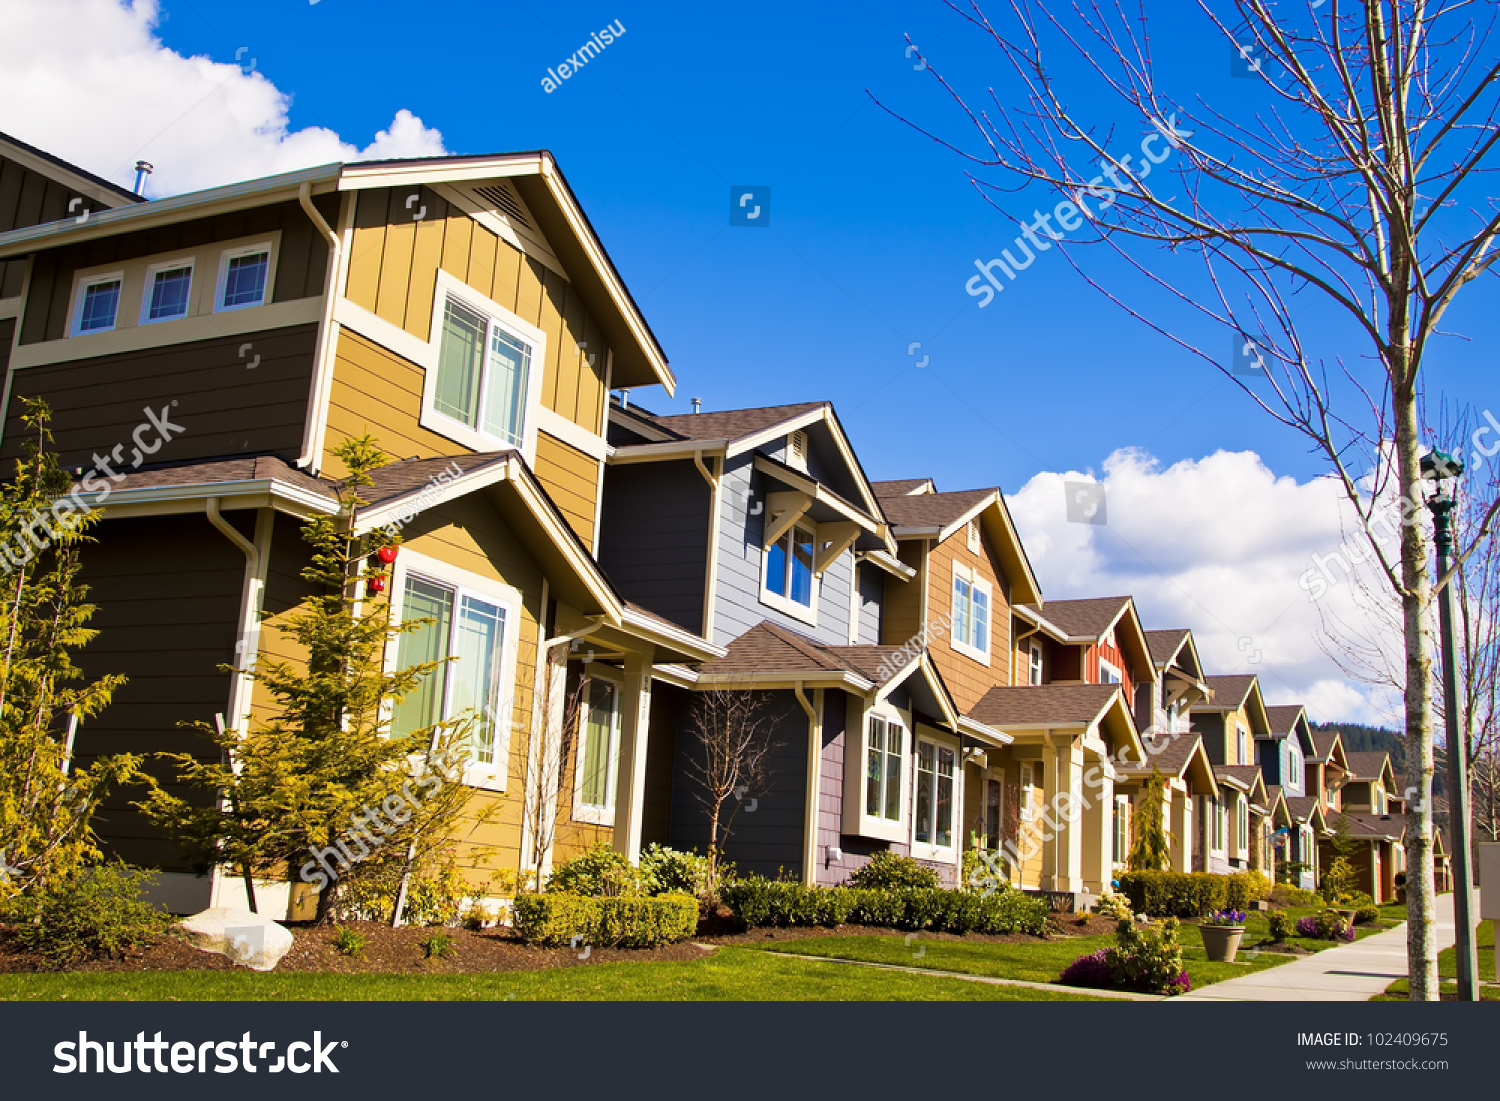 Perfectly Manicured Suburban Street On A Beautiful Sunny Day Stock